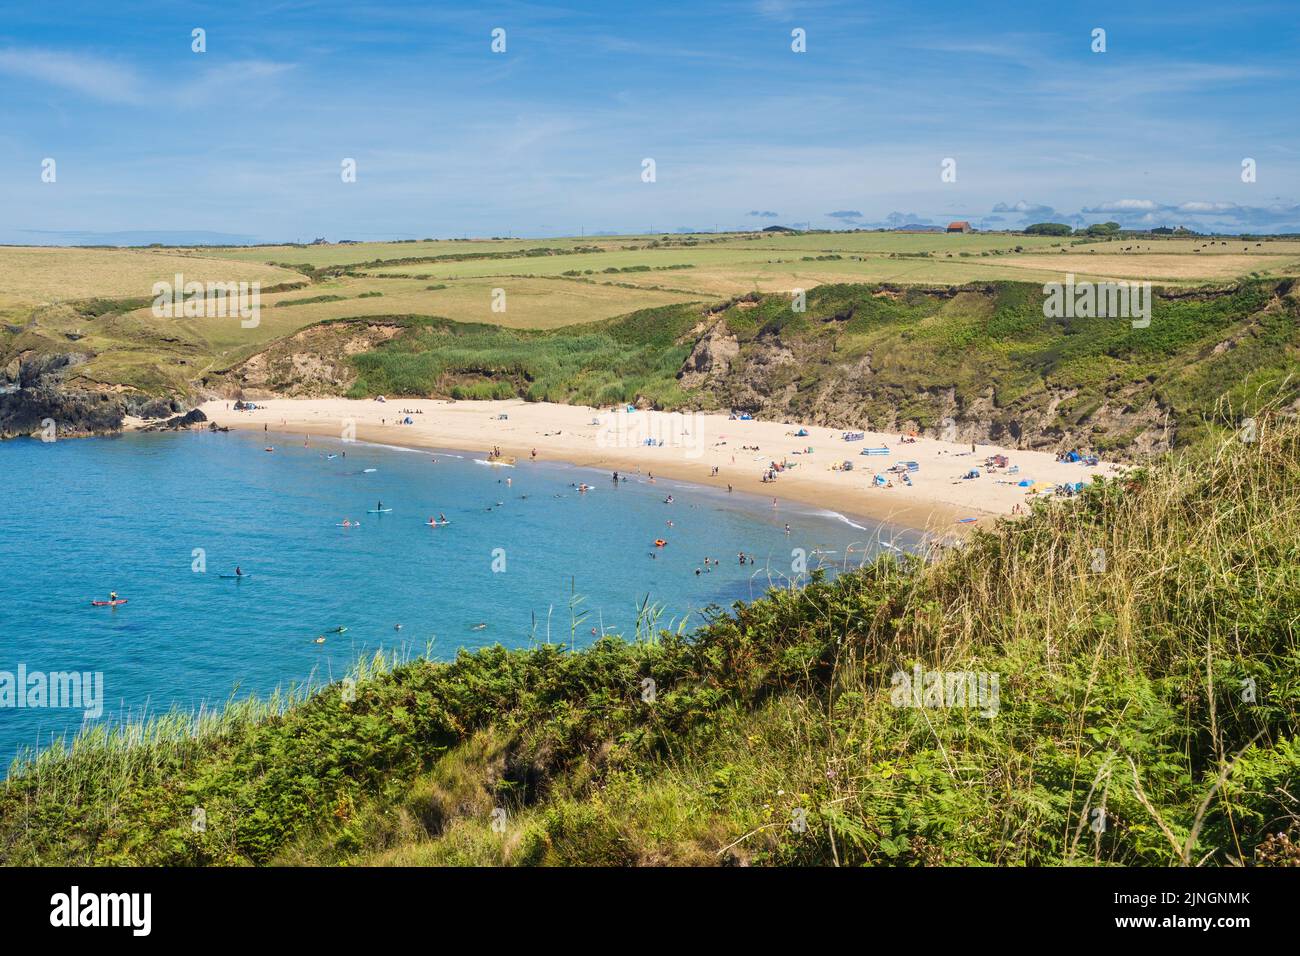 Whistling Sands is a crescent-shaped sandy beach backed by grassy cliffs located at Porth Oer on the Llyn Peninsula. Stock Photo